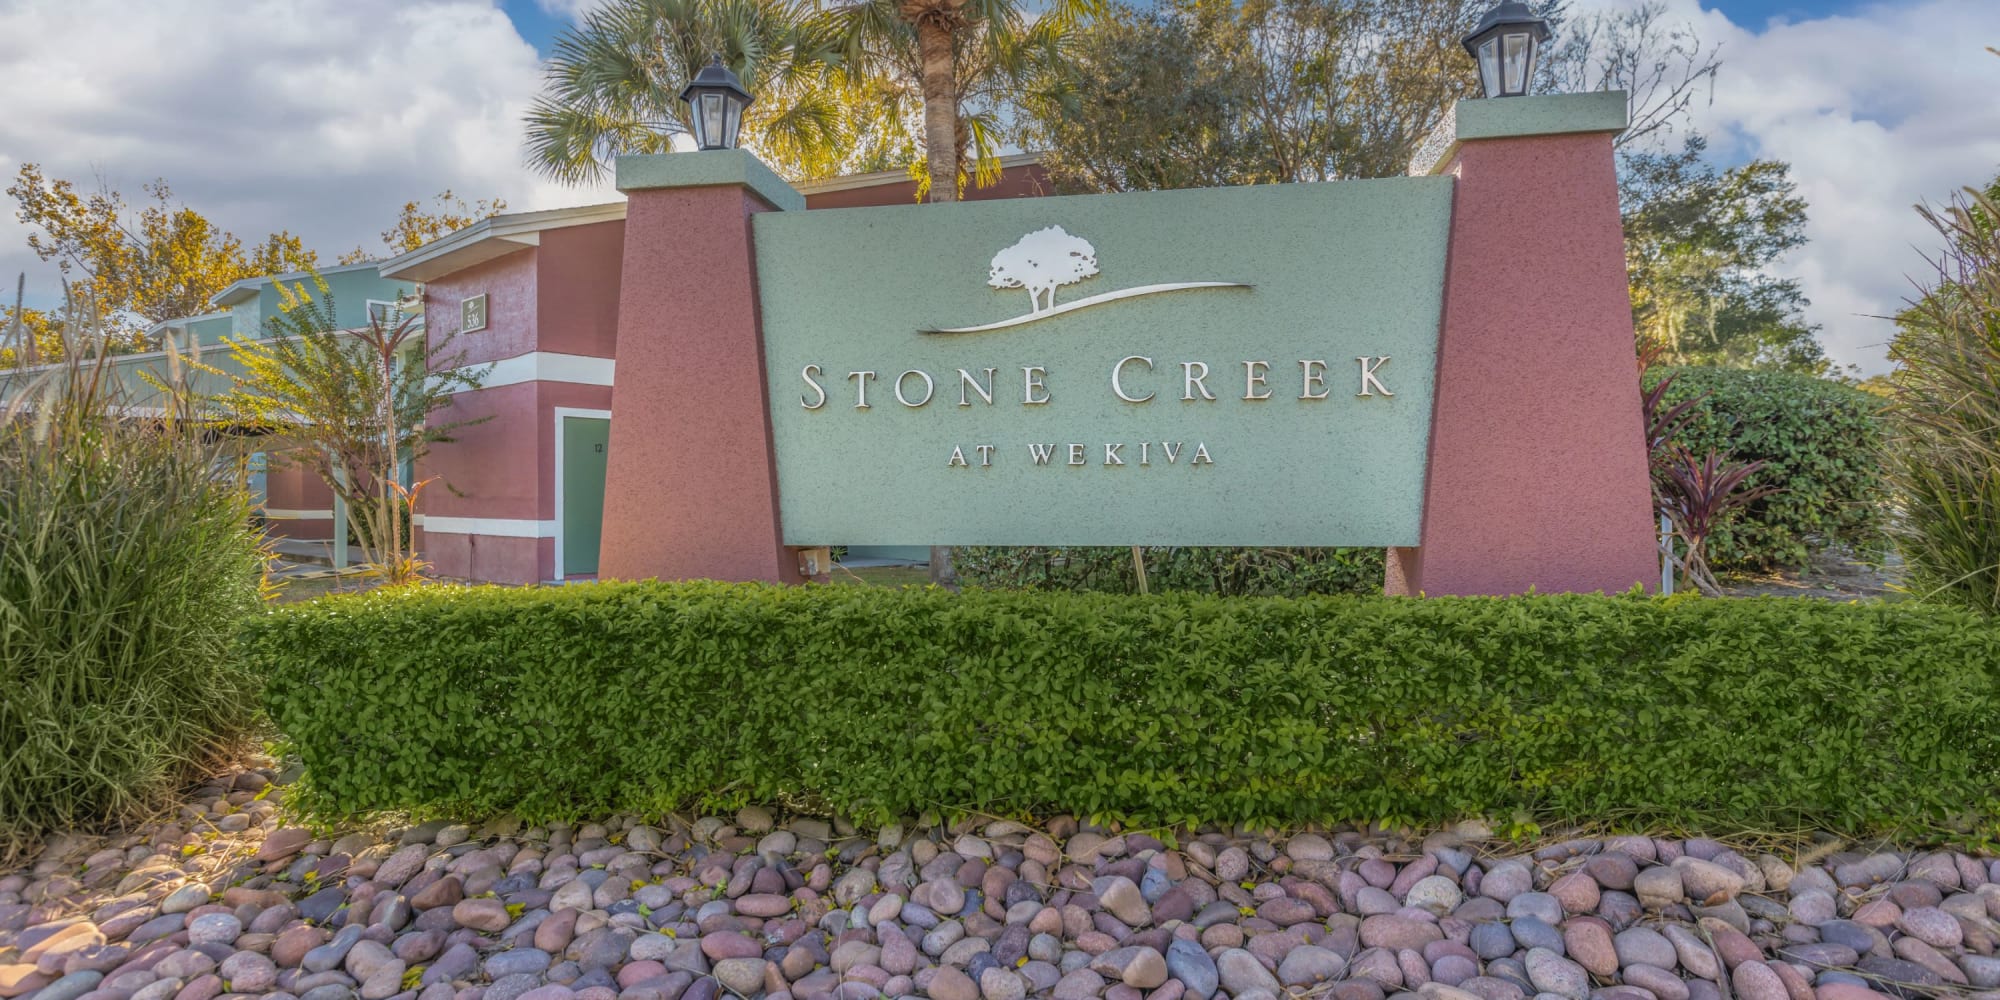 Sign at the entrance to Stone Creek at Wekiva in Altamonte Springs, Florida